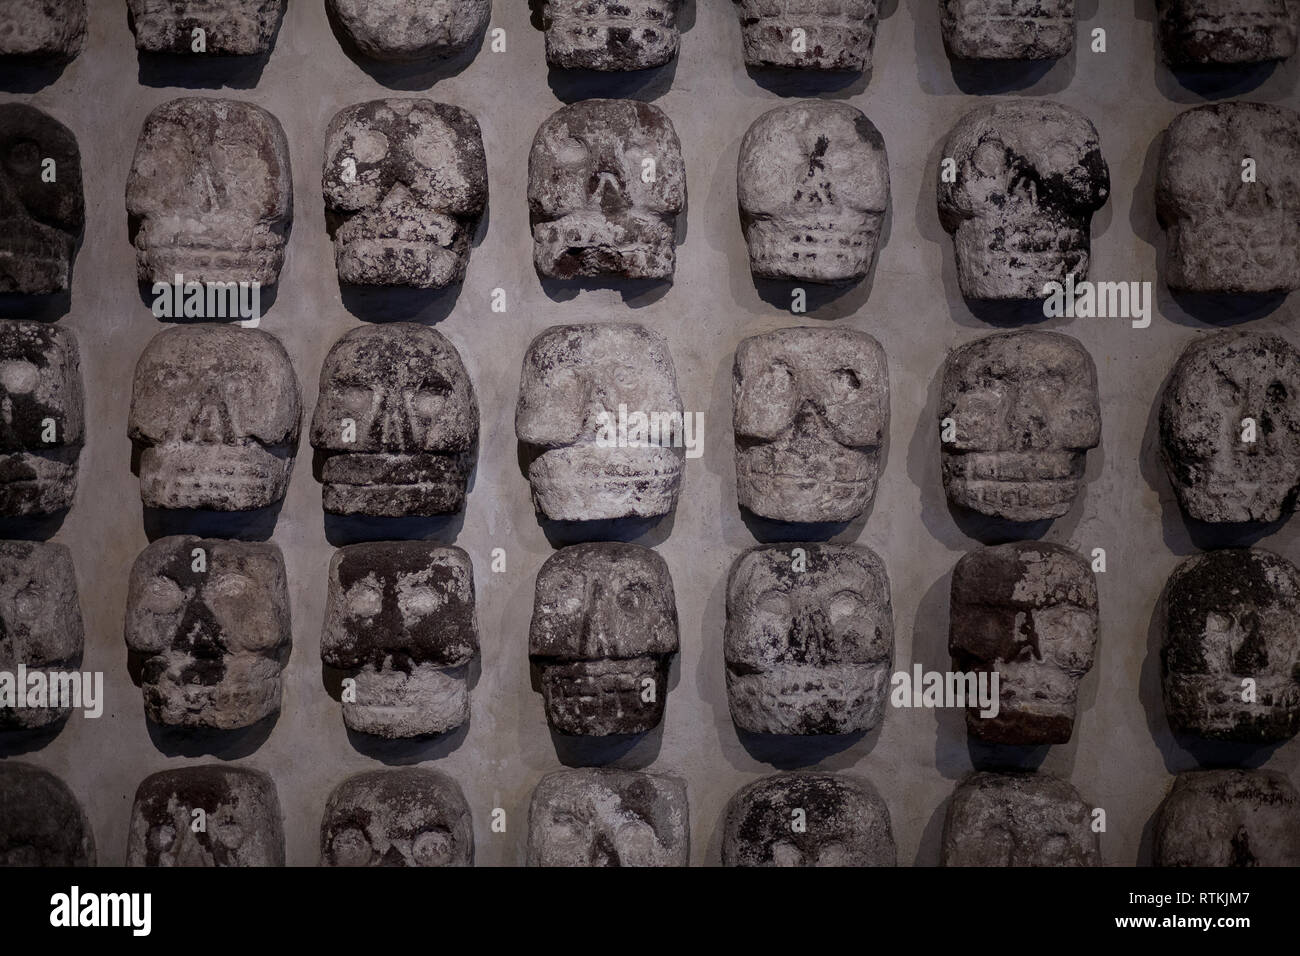 Stone sculptures of skulls as a wall called a Tzompantli located in tenochtitlanan Aztec city buried underneath Mexico City, Mexico Stock Photo